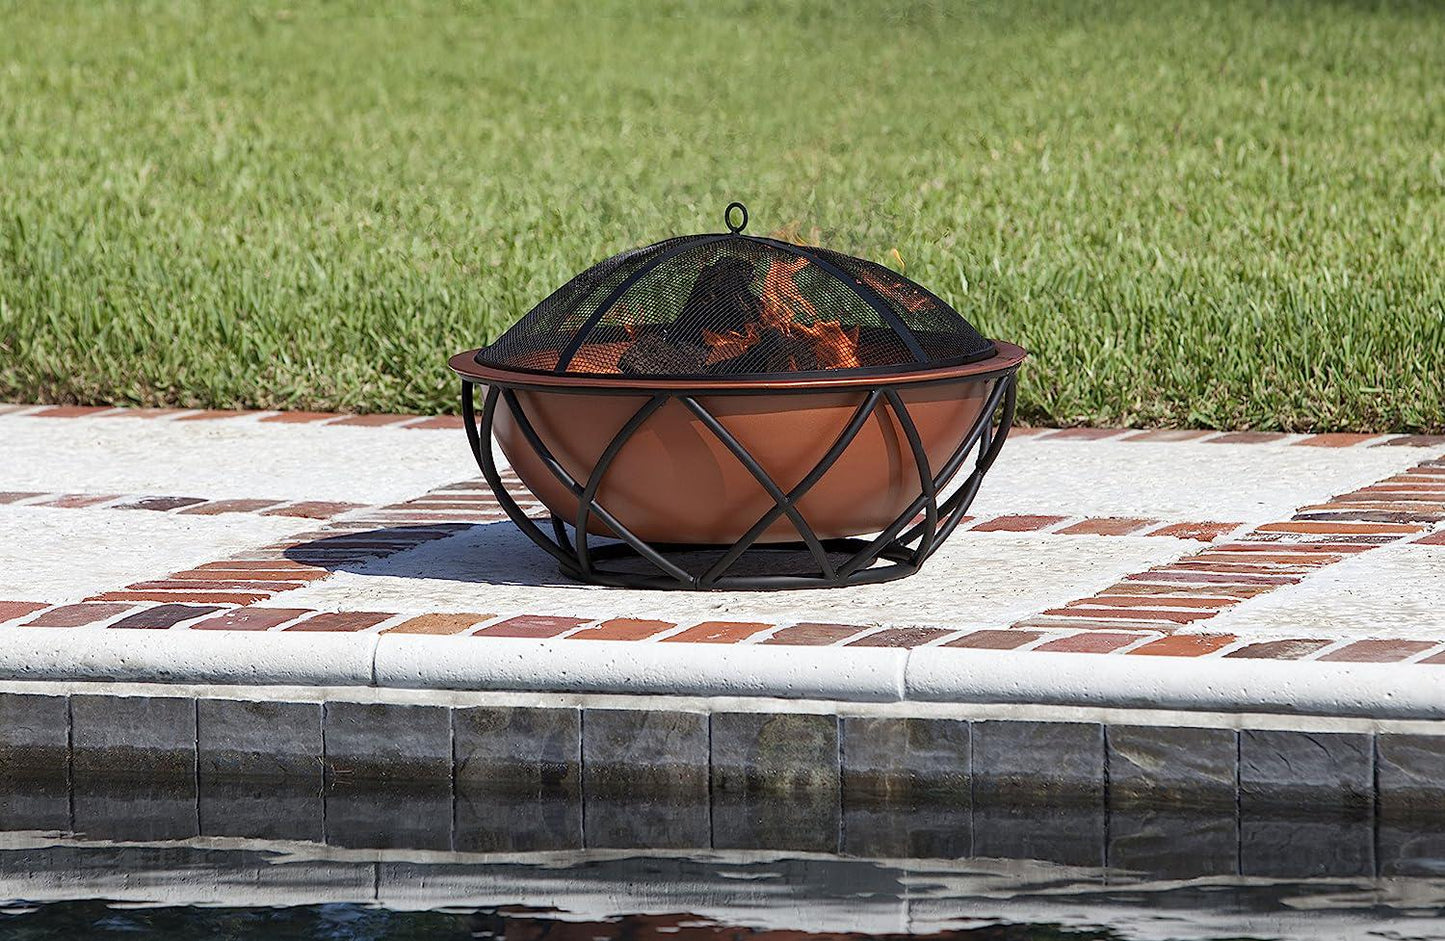 Fire Pit Barzelonia Copper-Look Wood Burning Lightweight Portable Outdoor Firepit Backyard Fireplace Camping Bonfire Included Screen Lift Tool and Cooking Grate - Round - 26